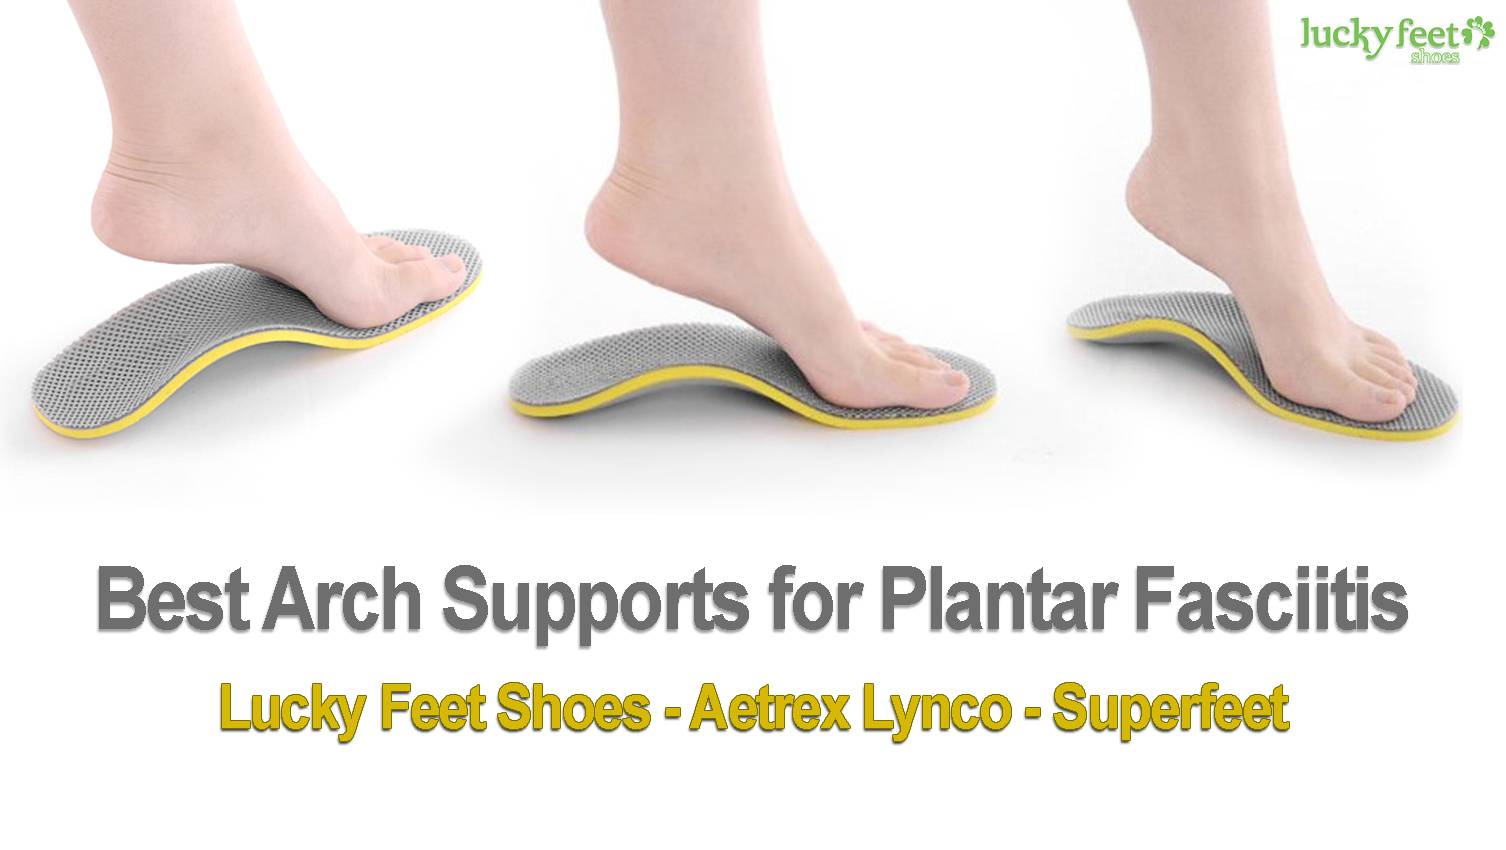 heel and arch support